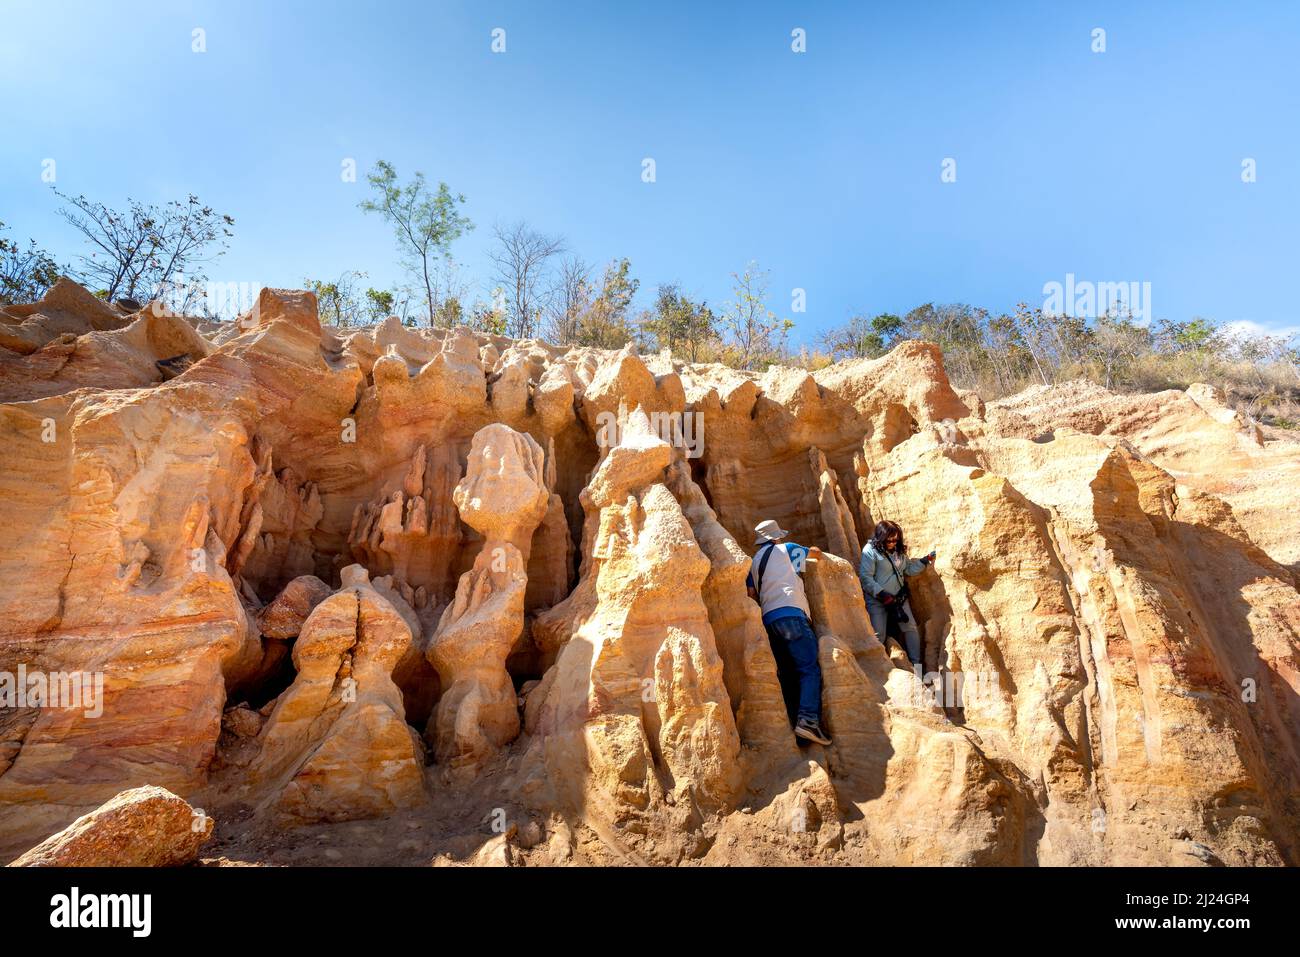 Chu Se district, Gia Lai province, Vietnam - March 5, 2022: Tourists visit a slope with mostly sandy soil, which due to natural soil erosion over the Stock Photo